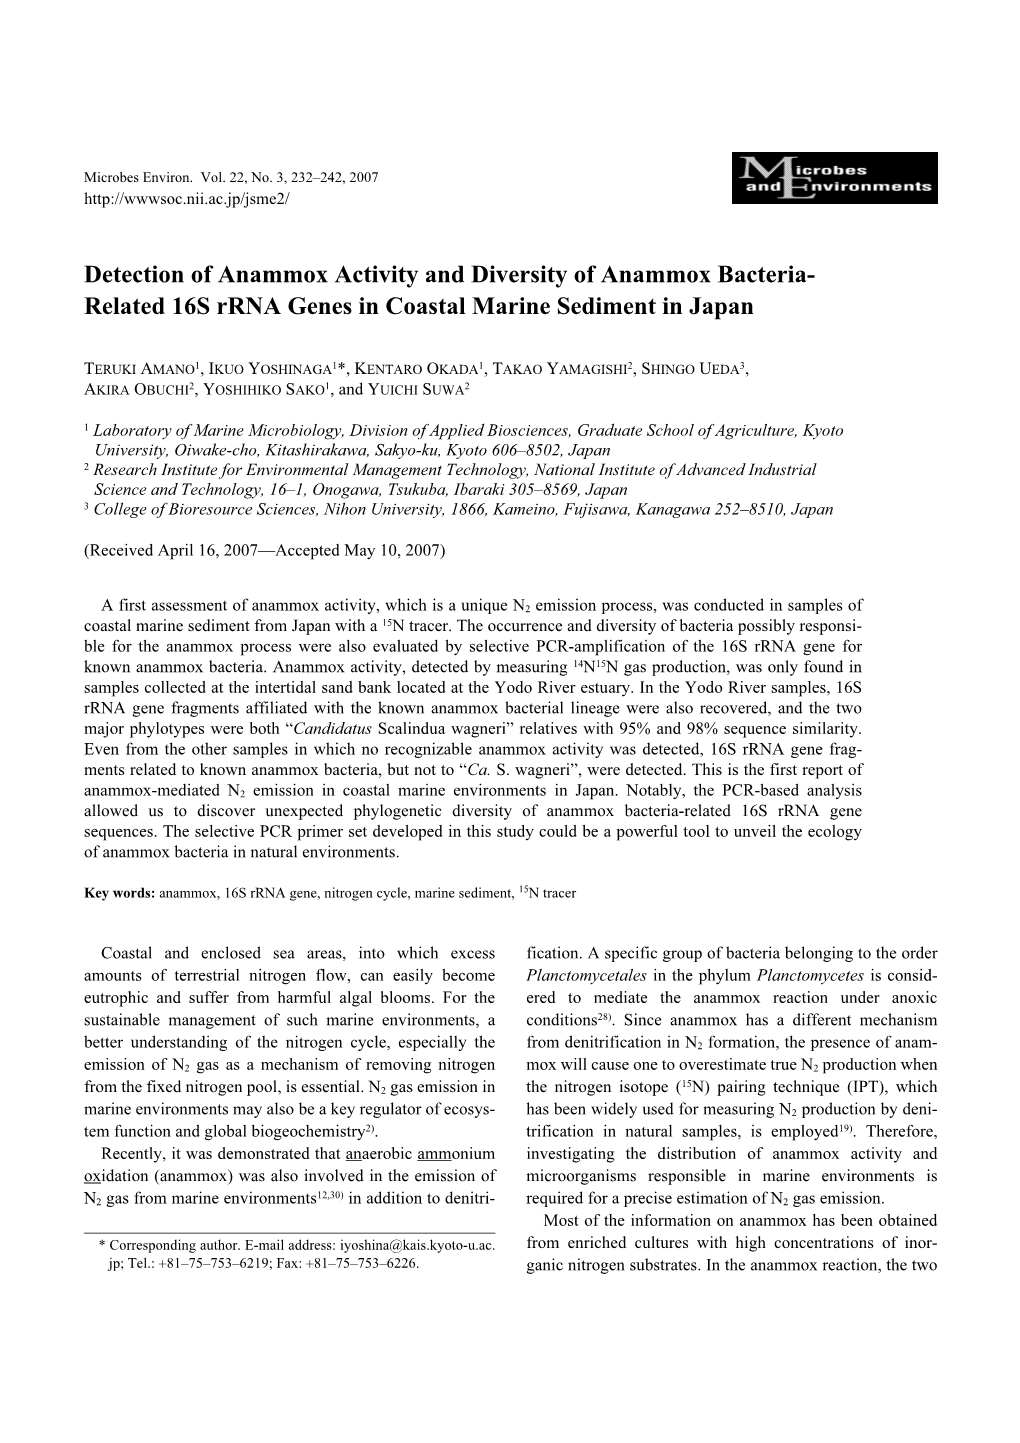 Detection of Anammox Activity and Diversity of Anammox Bacteria- Related 16S Rrna Genes in Coastal Marine Sediment in Japan